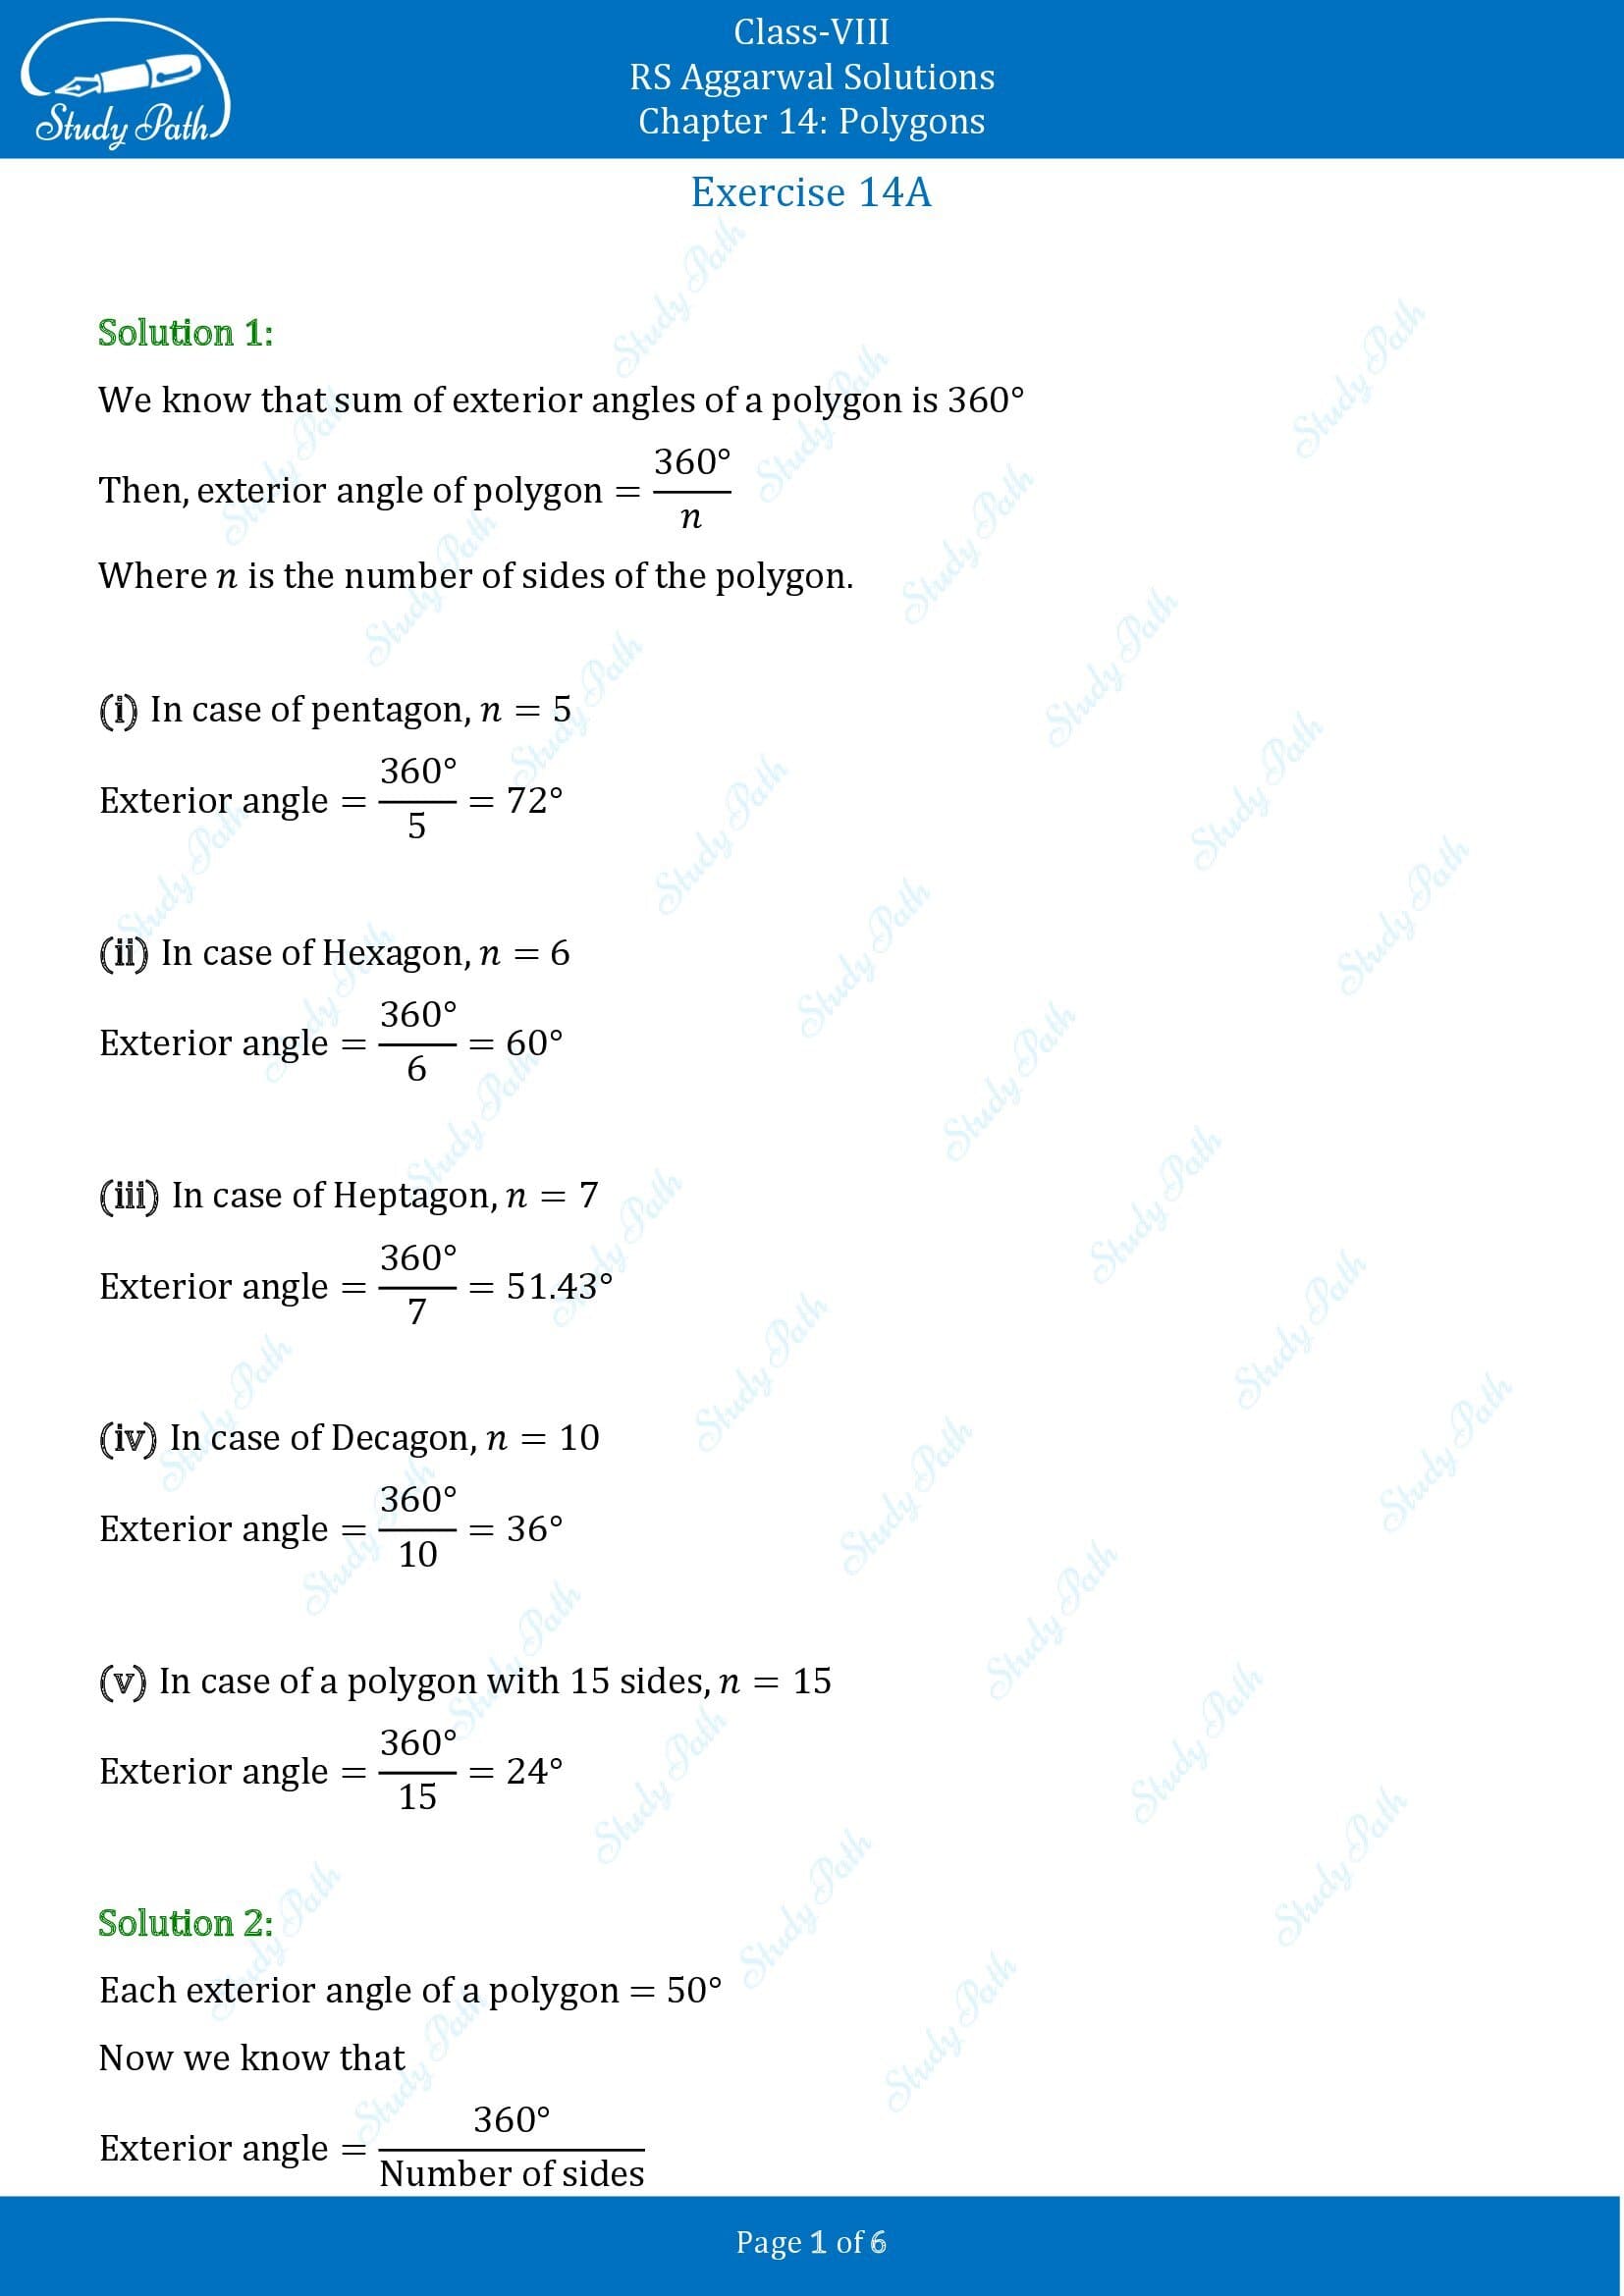 RS Aggarwal Solutions Class 8 Chapter 14 Polygons Exercise 14A 00001